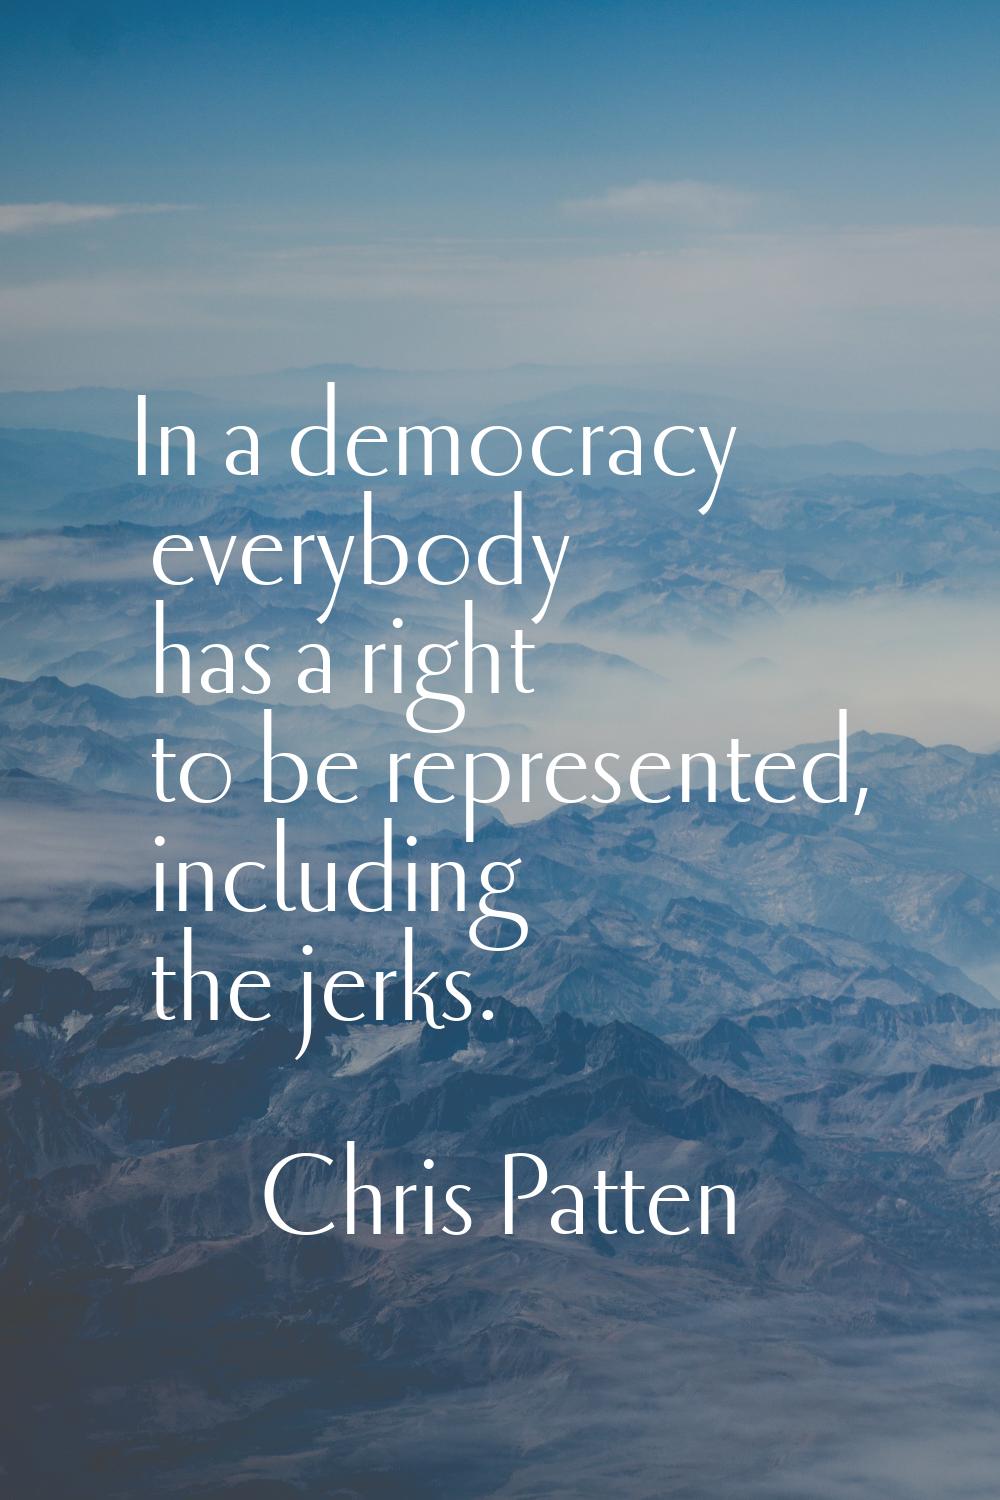 In a democracy everybody has a right to be represented, including the jerks.